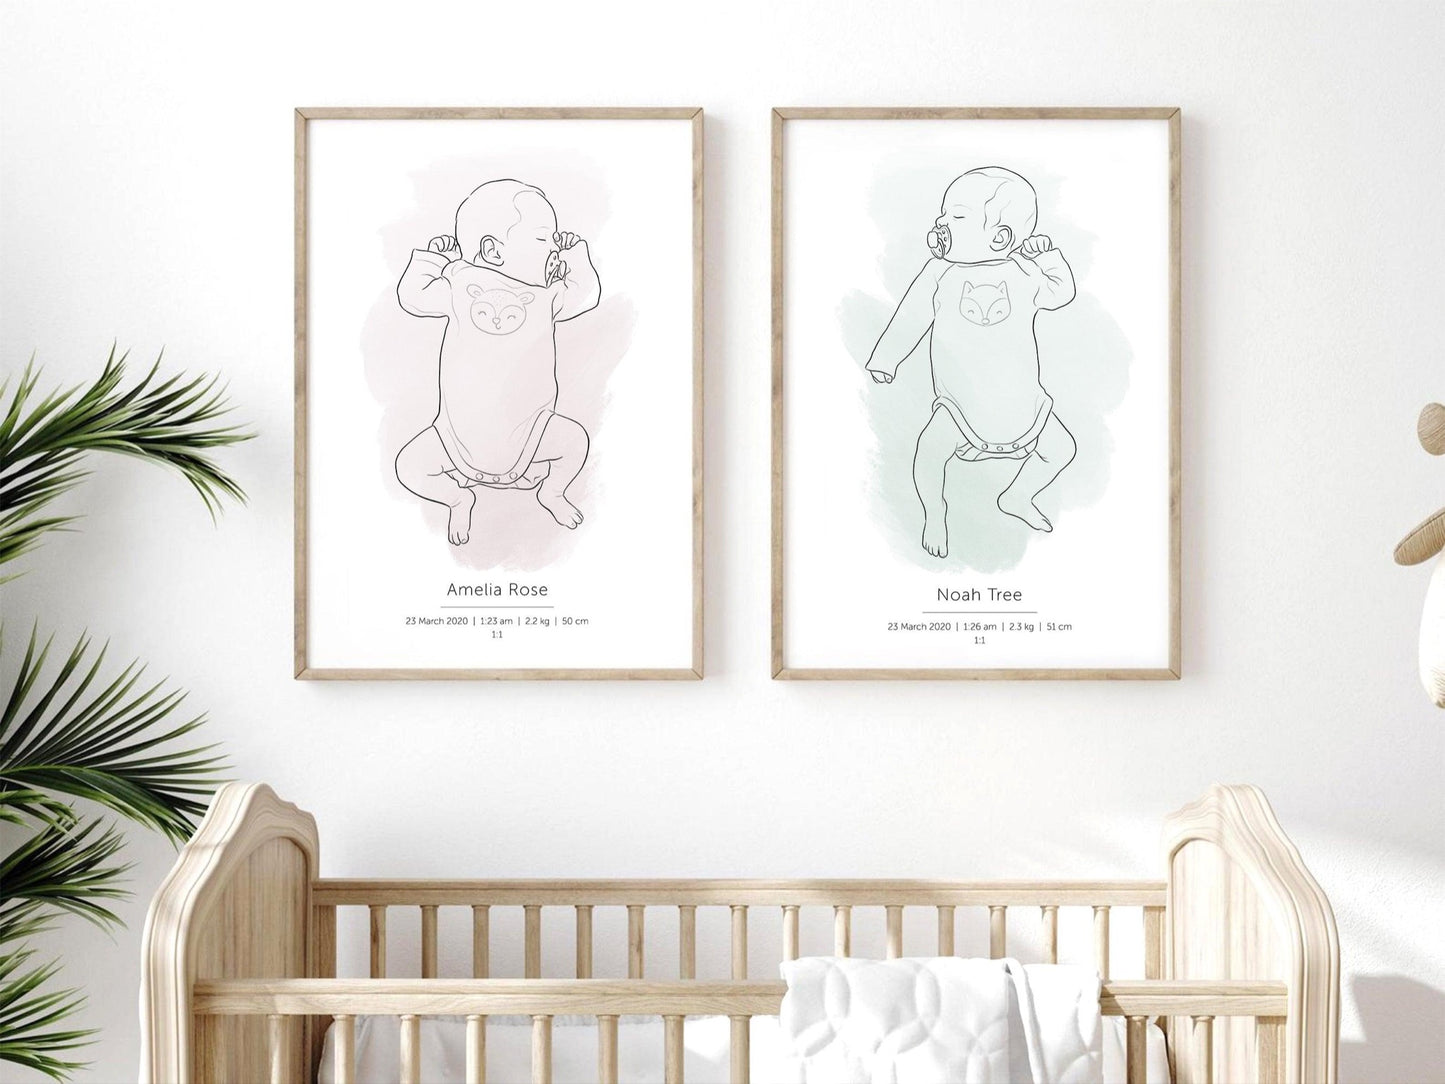 Custom made birth posters of twins in 1:1 scale with a detailed hand drawn portrait of the twins